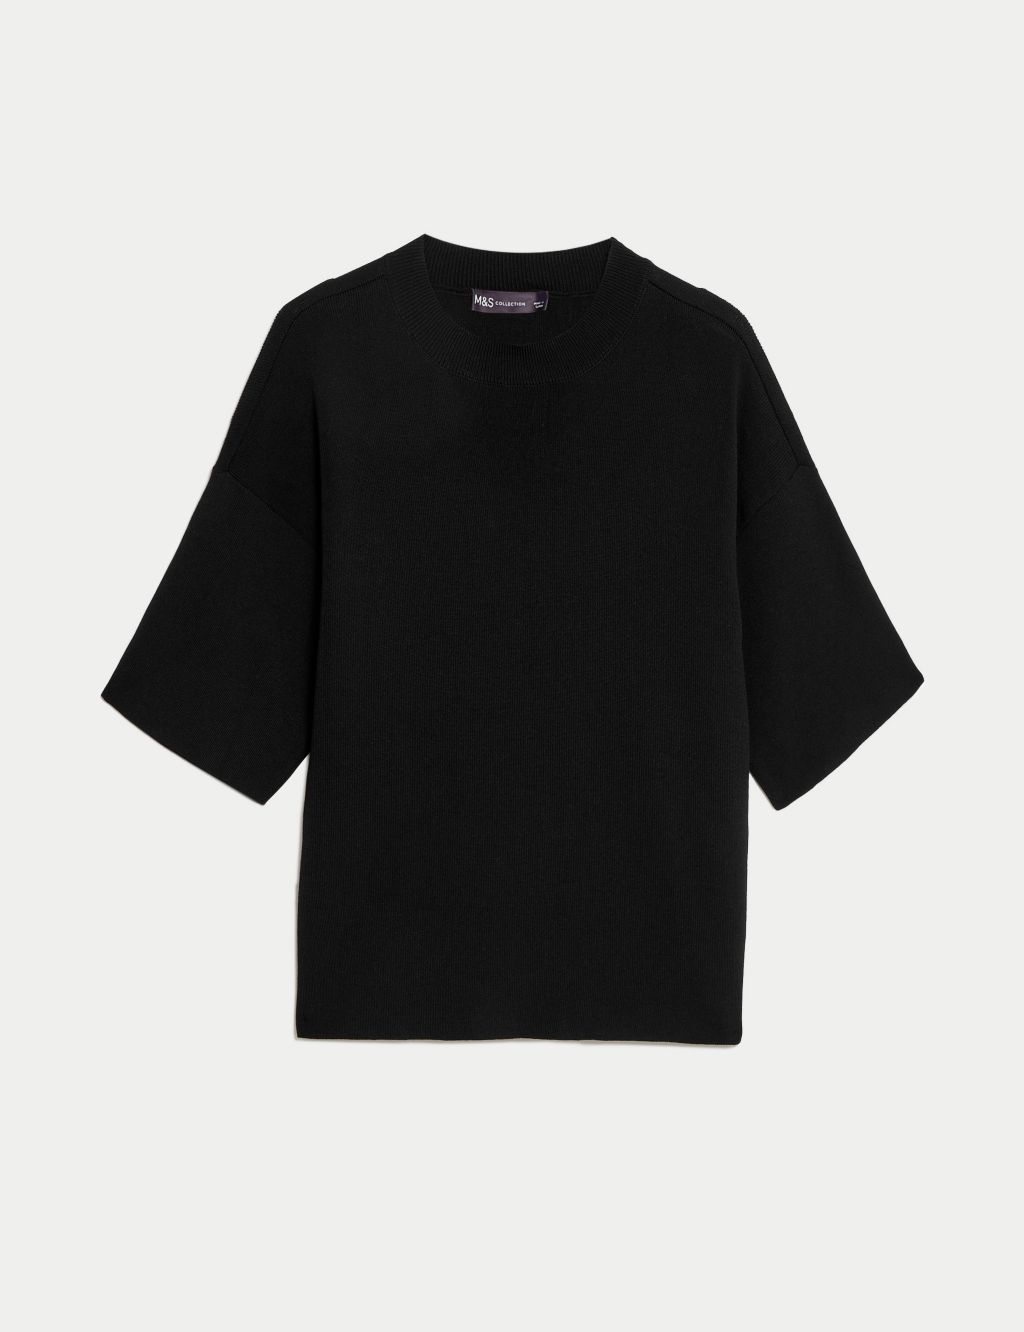 Crew Neck Knitted Top image 2